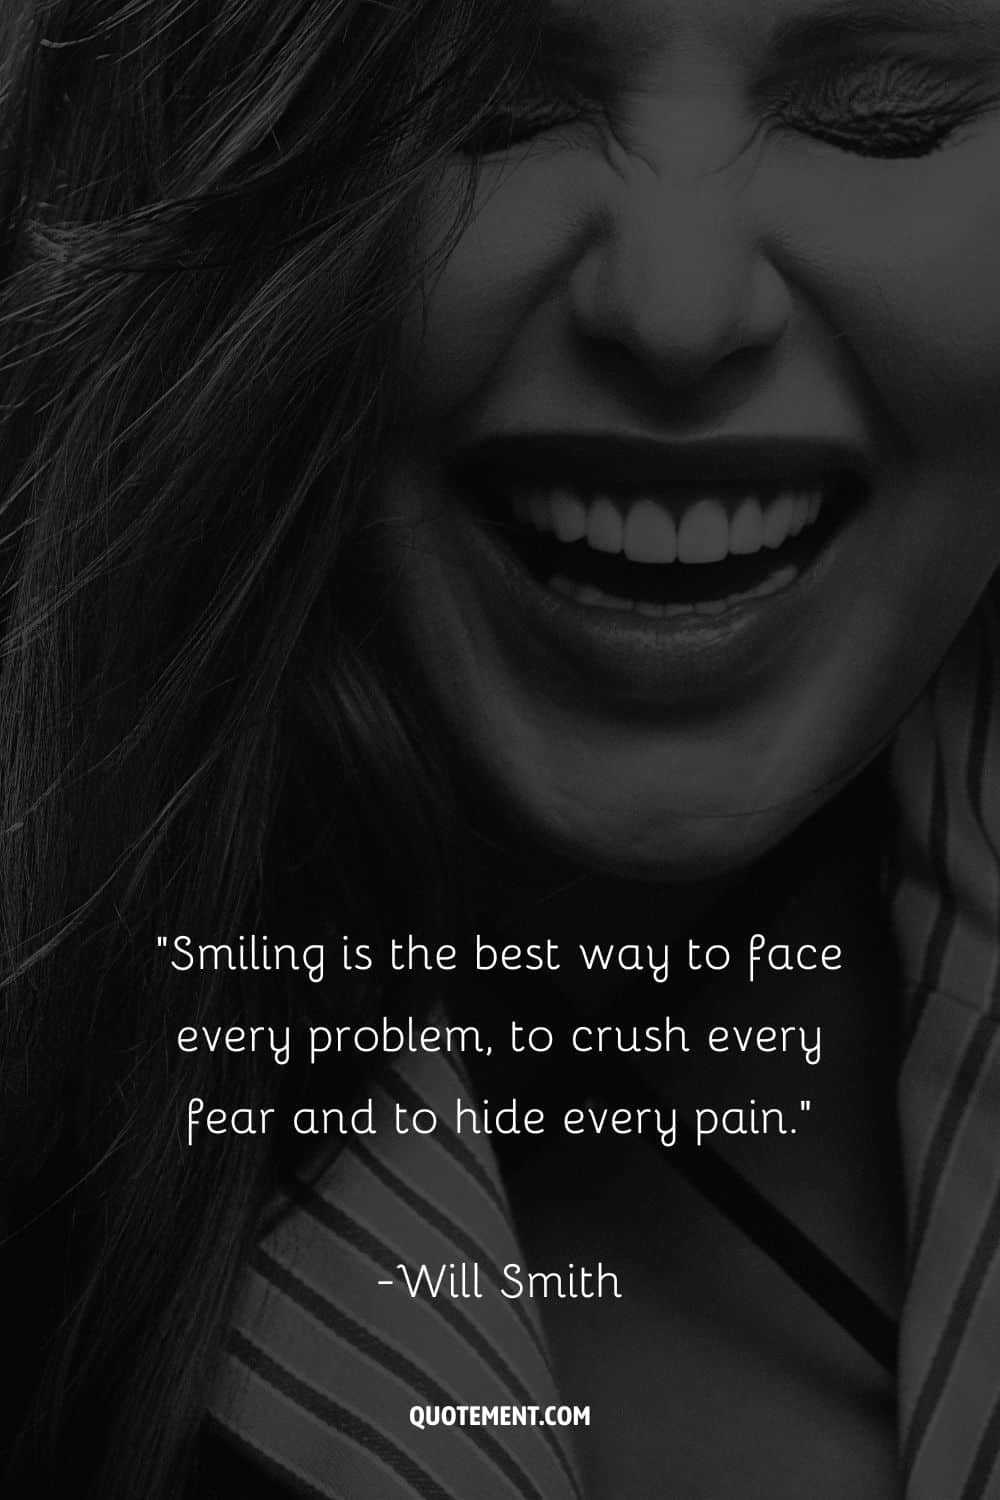 Smiling is the best way to face every problem, to crush every fear and to hide every pain. – Will Smith